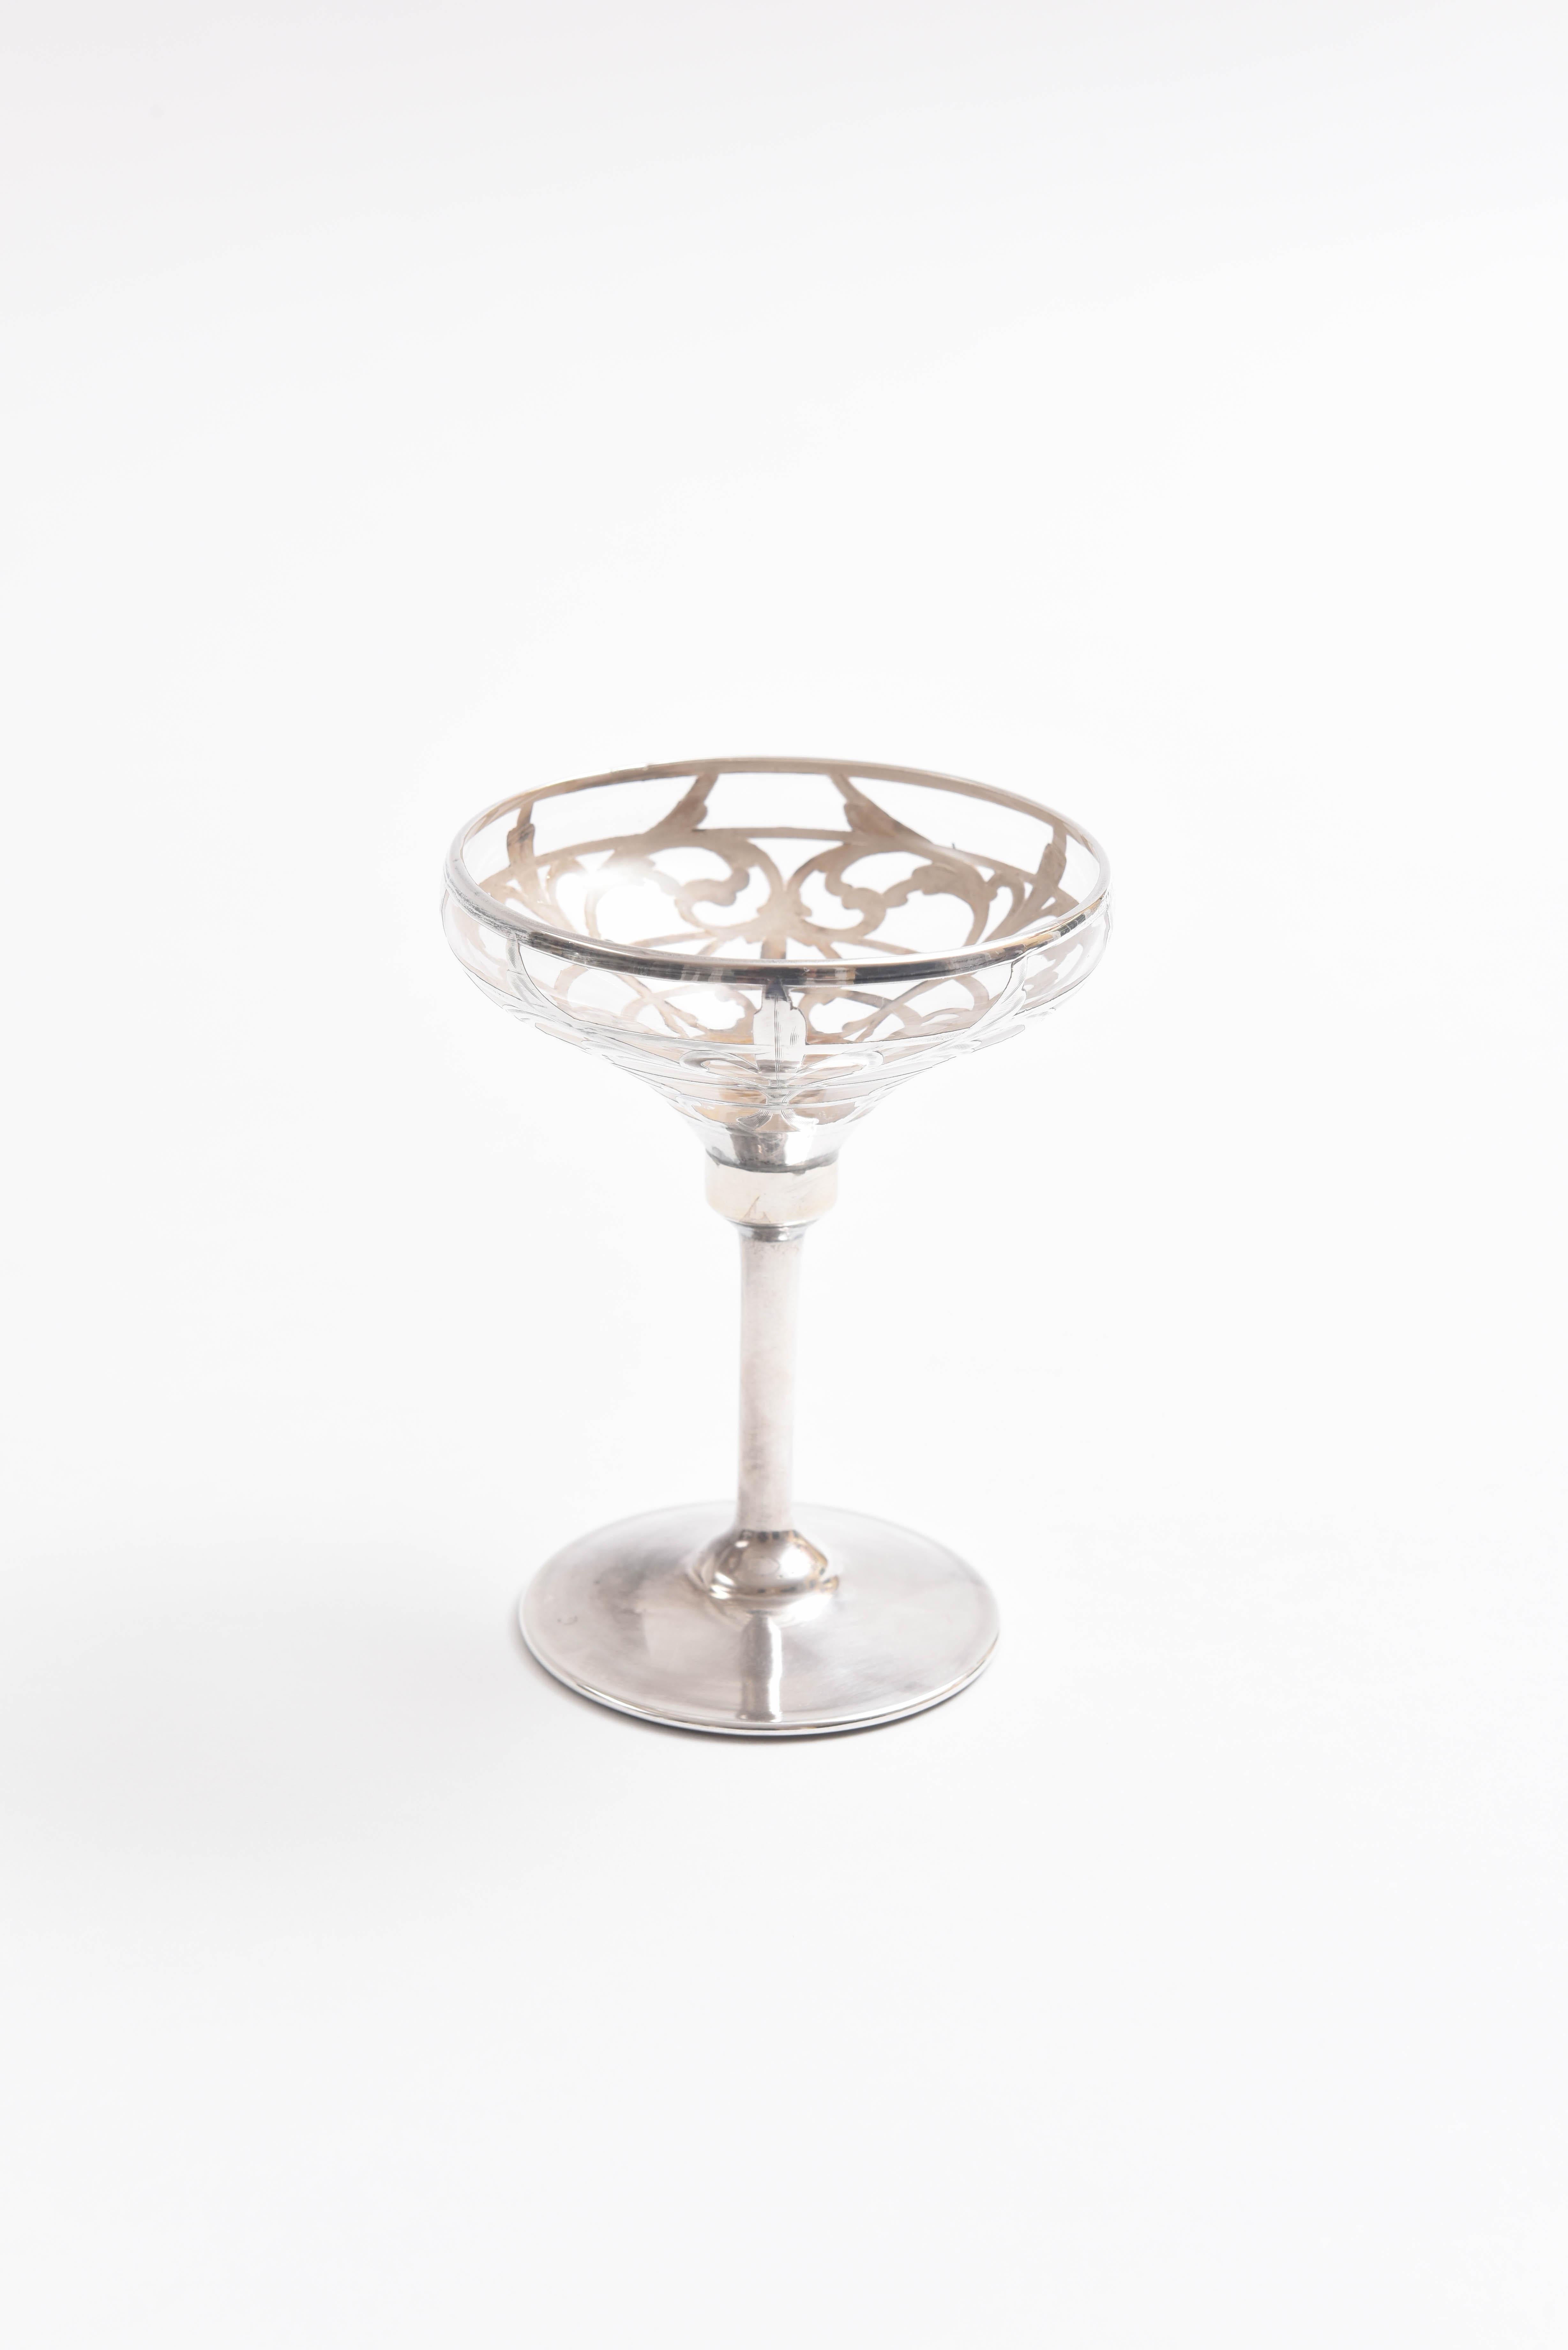 American Six Sterling Overlay Champagne Coupes, Antique Art Nouveau